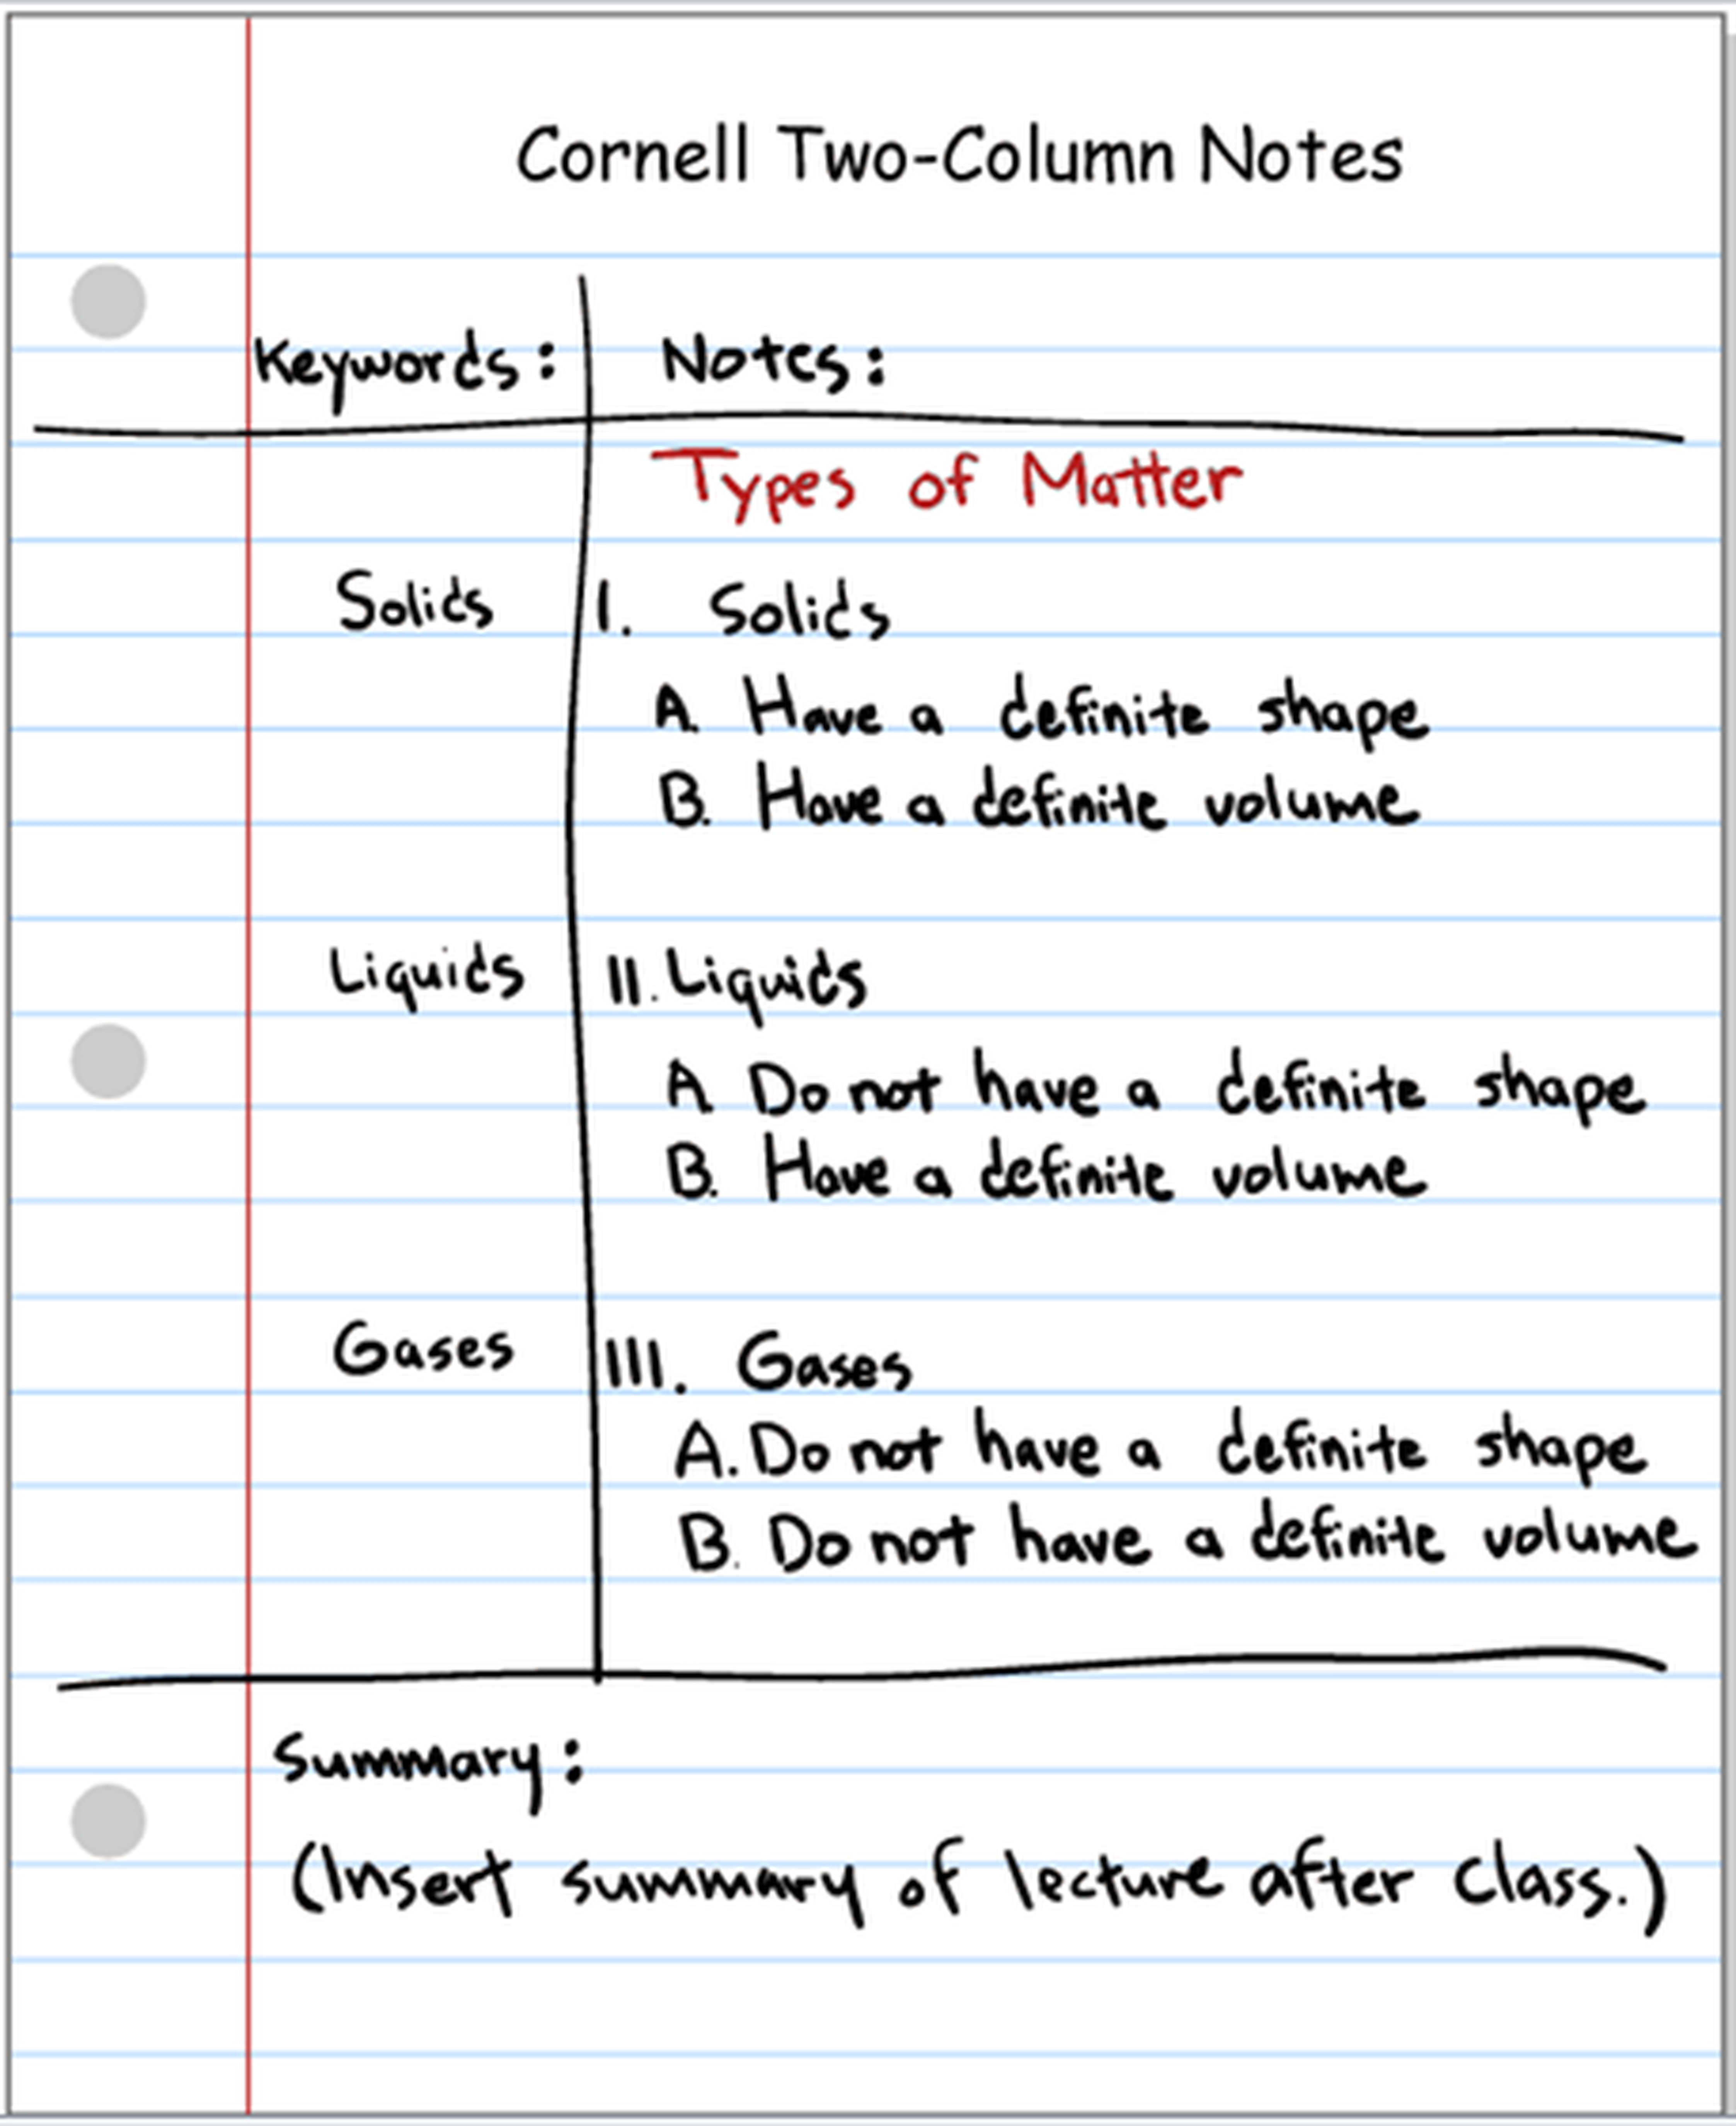 Examples of Cornell Notes - MVCA Earth Science